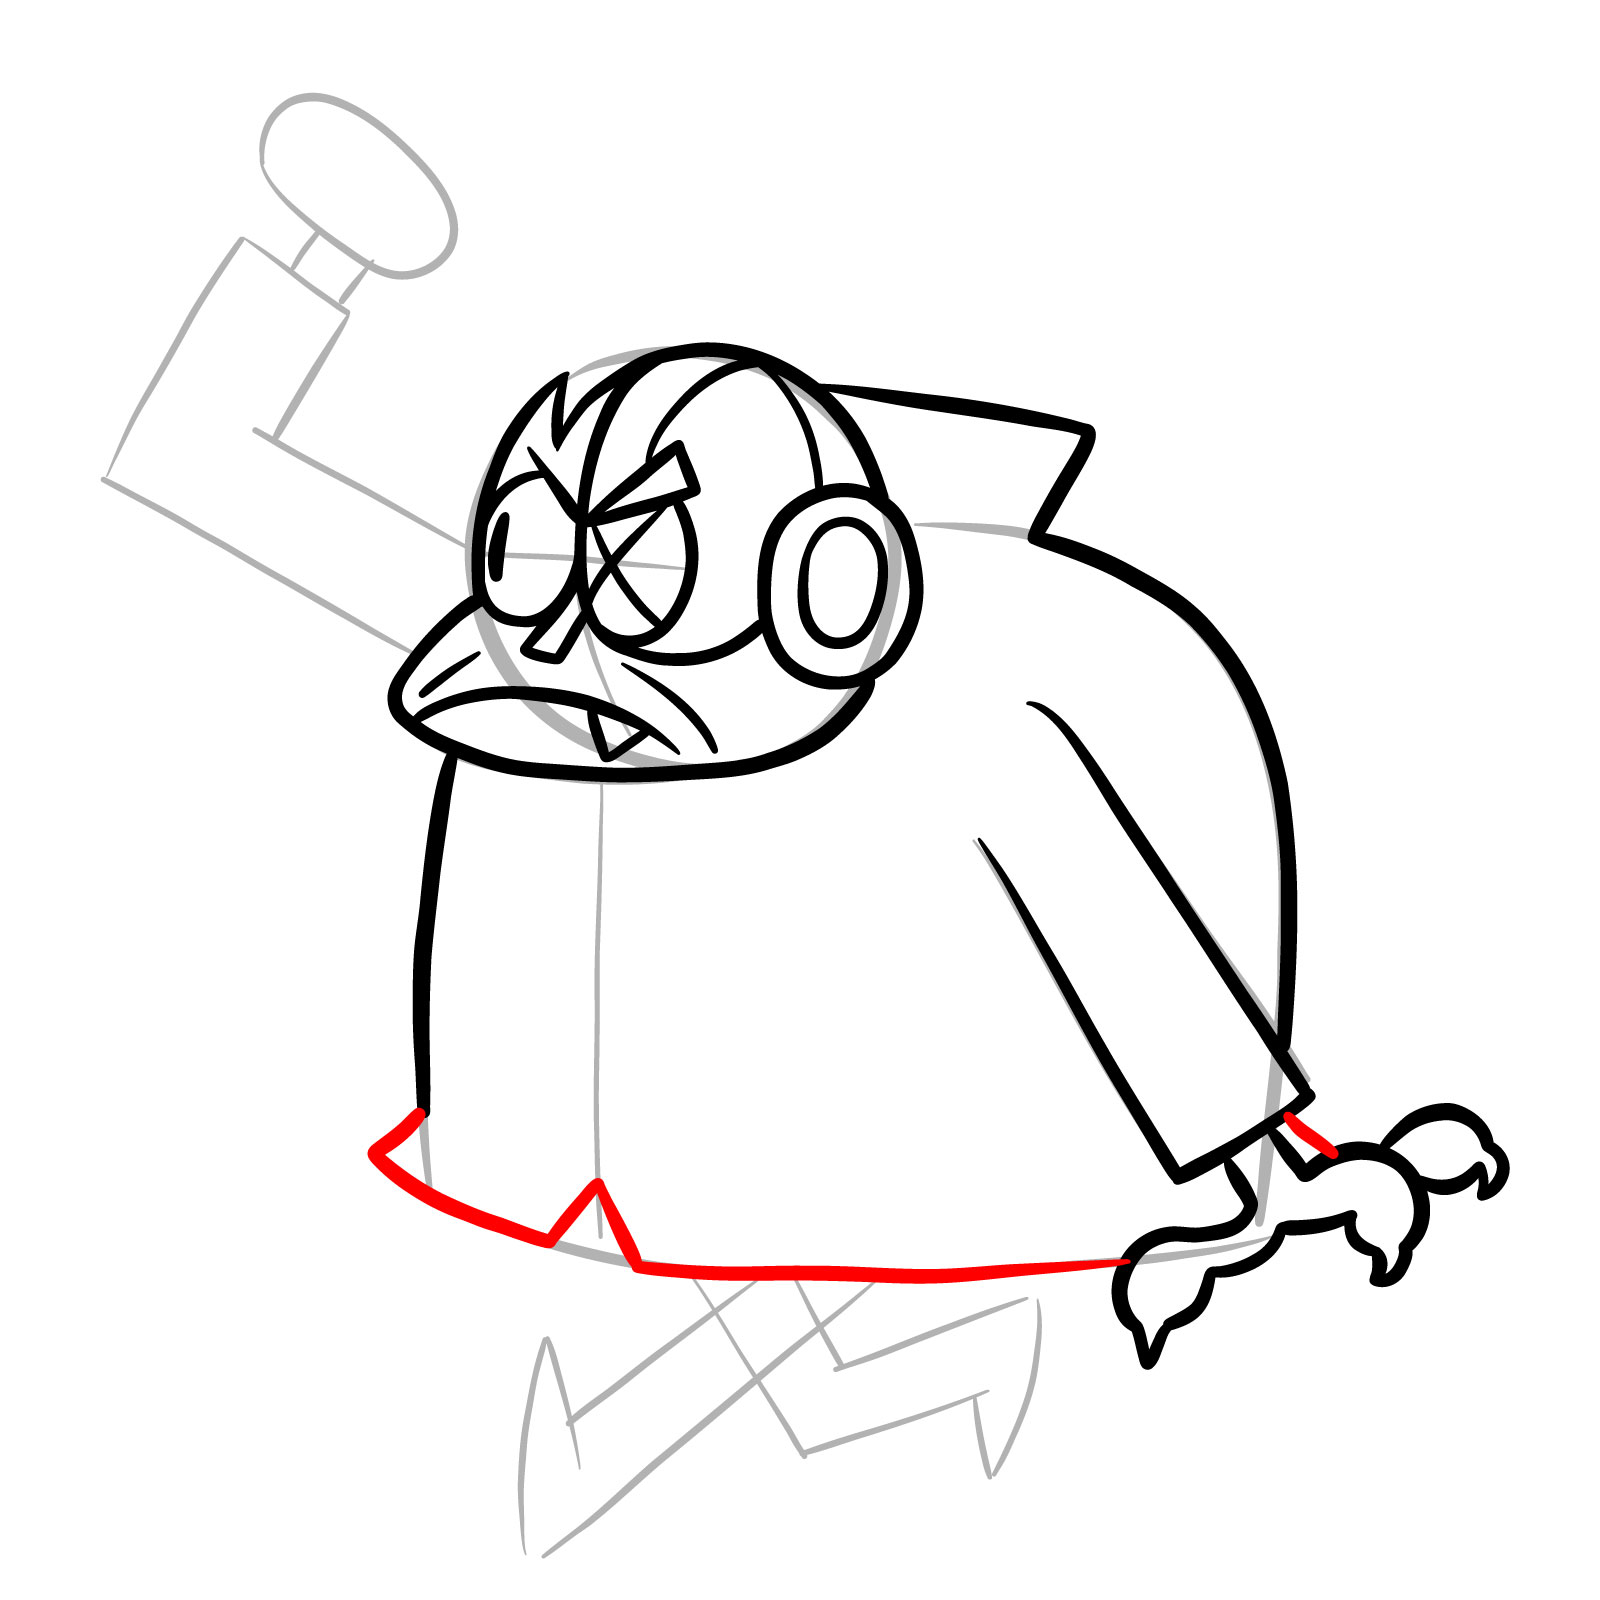 How to draw Lord Boxman from OK K.O.! - step 15